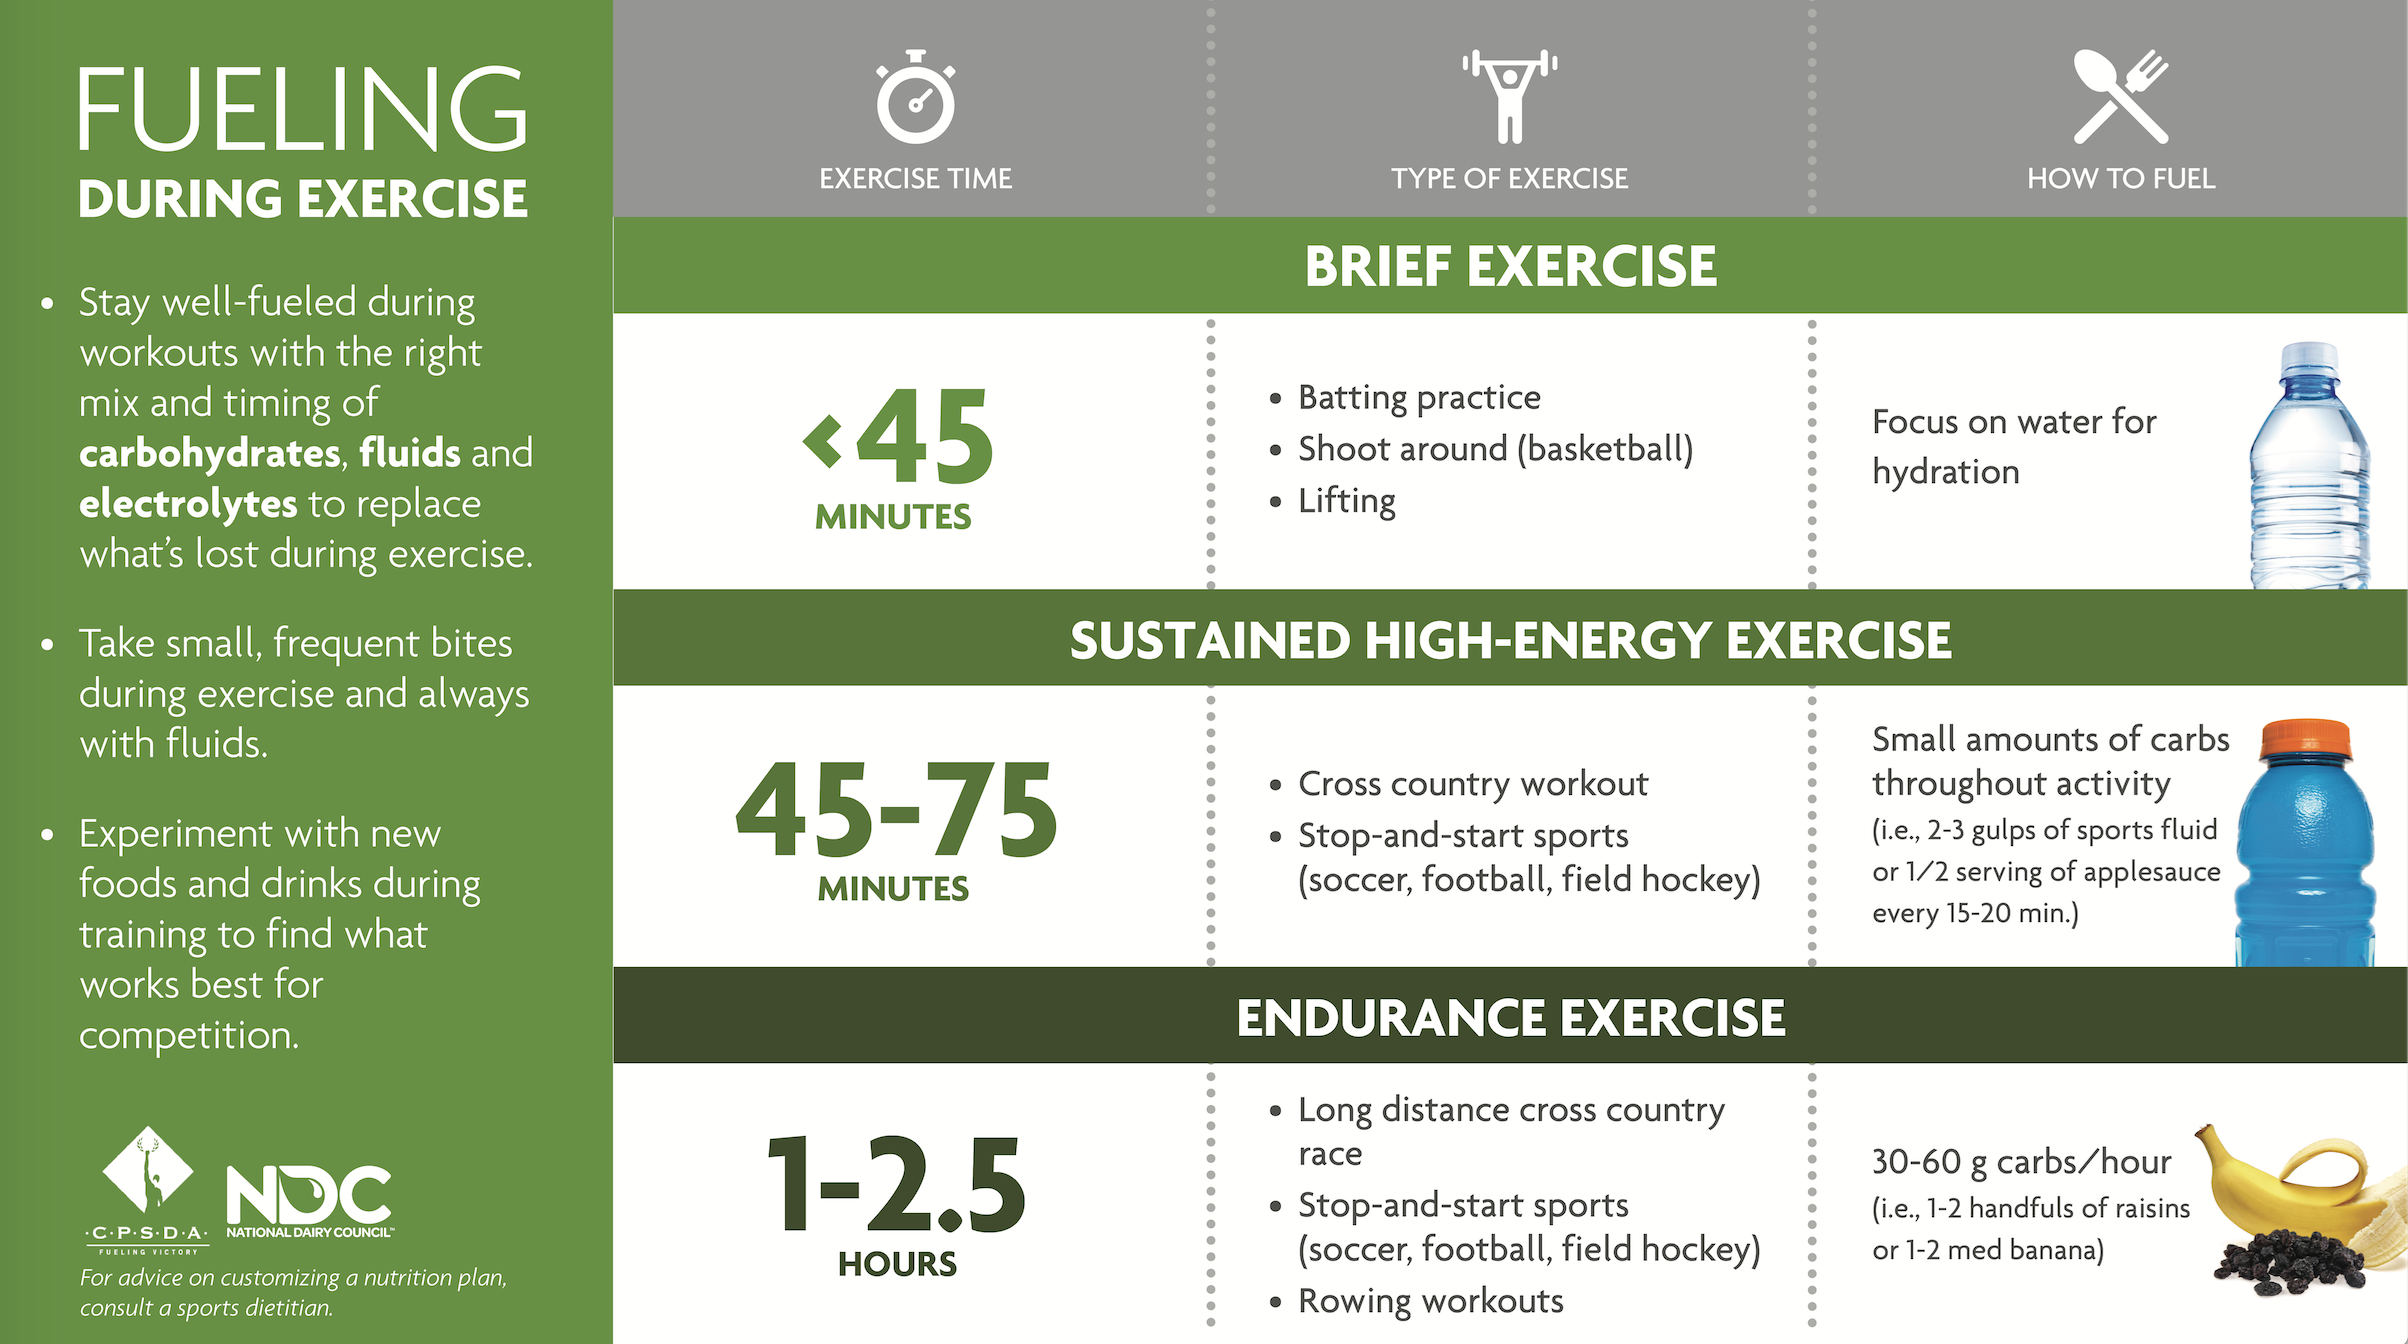 Soccer nutrition for fueling workouts